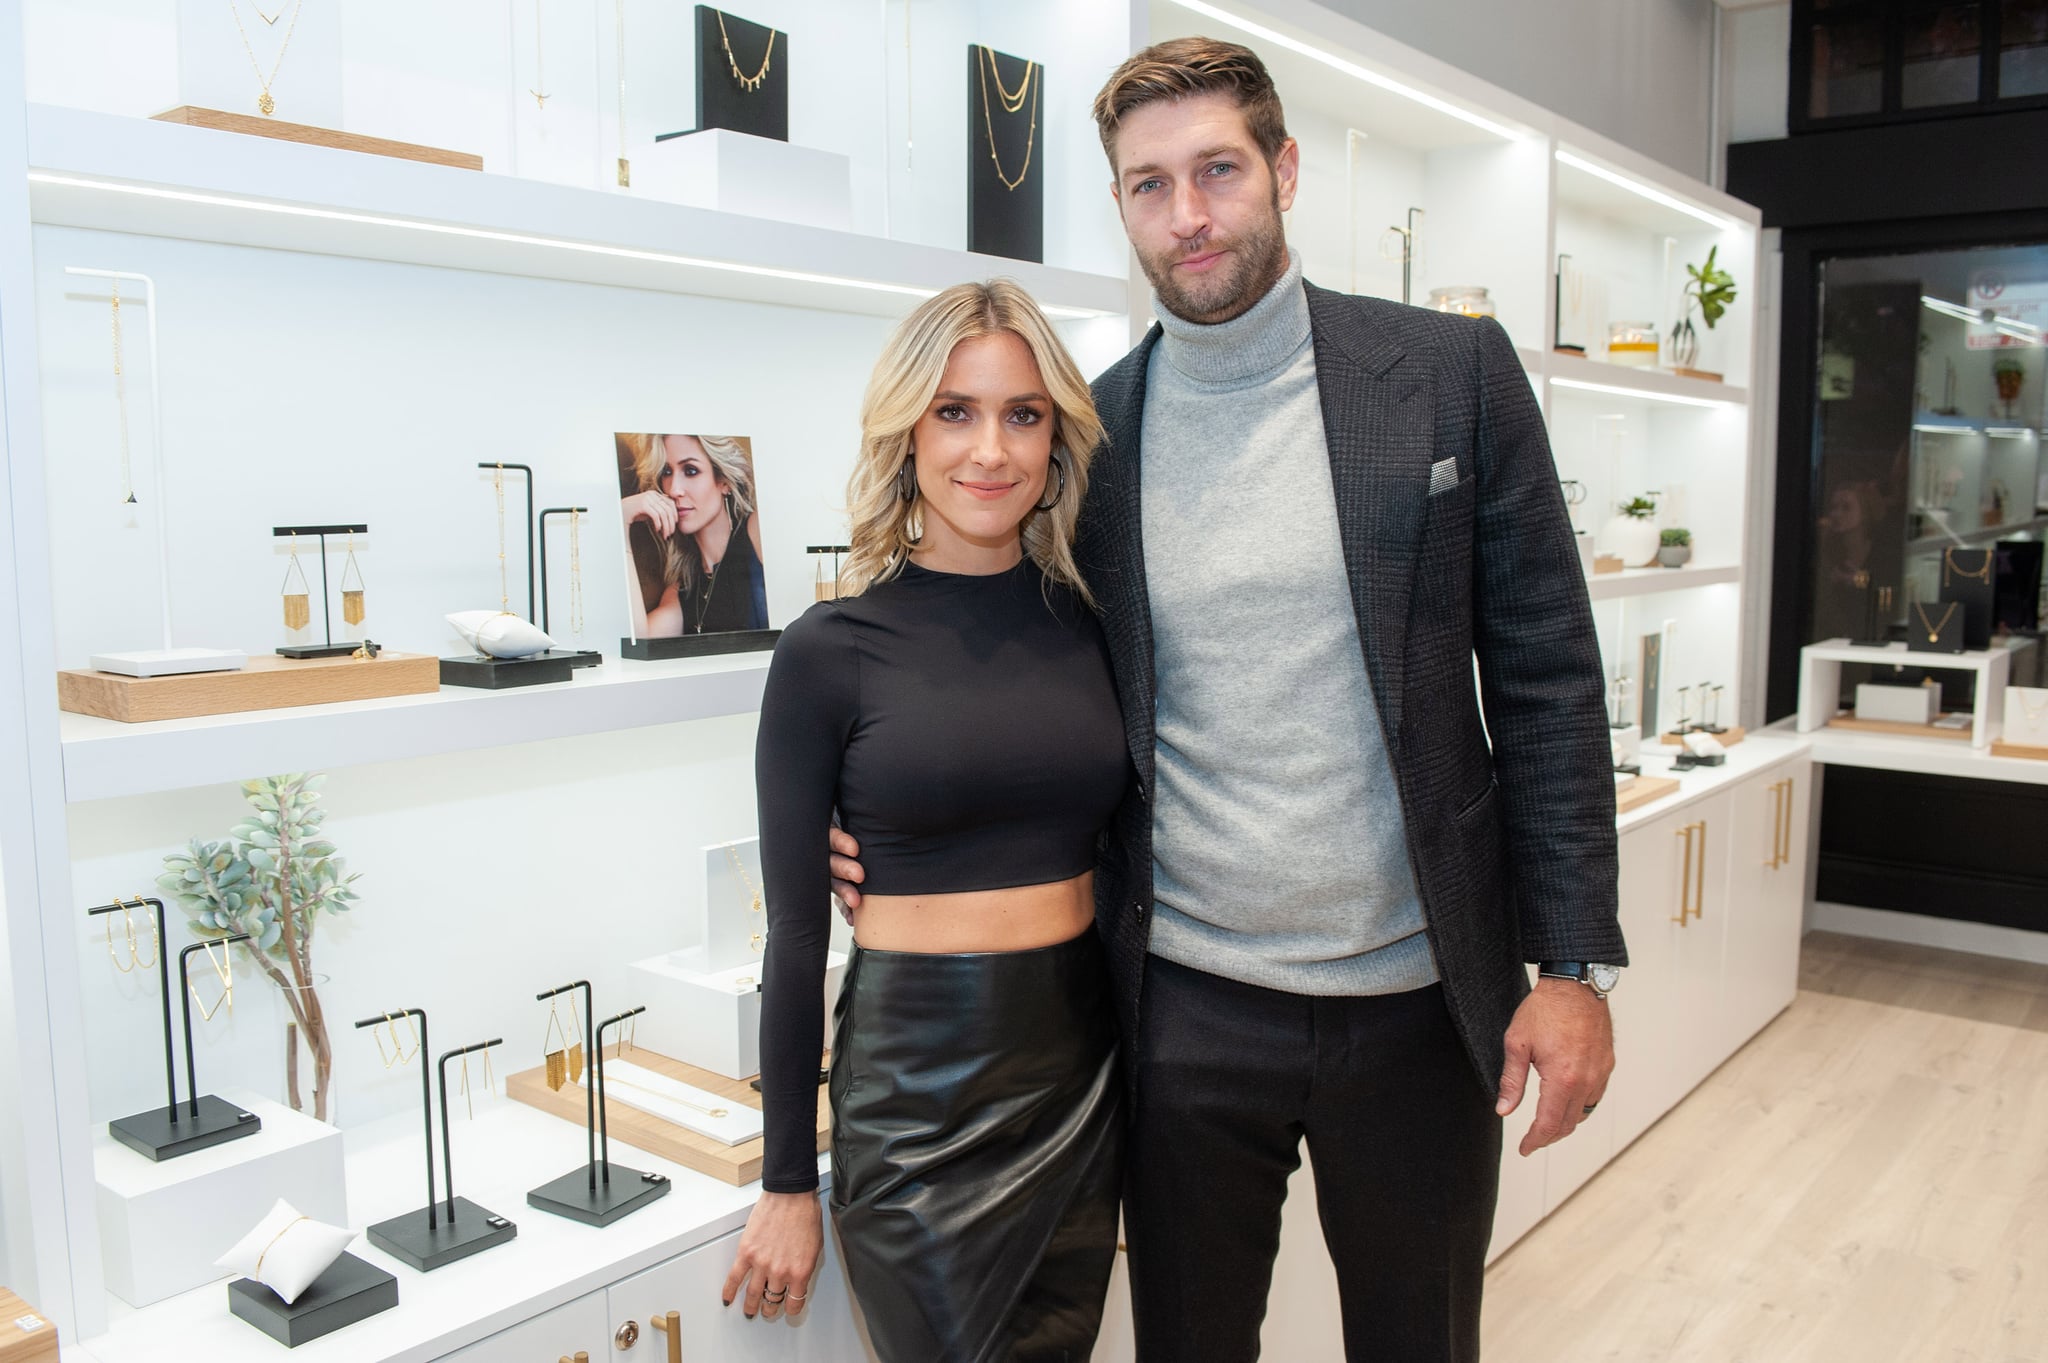 CHICAGO, ILLINOIS - OCTOBER 25: Kristin Cavallari and Jay Cutler attend the Uncommon James VIP Grand Opening at Uncommon James on October 25, 2019 in Chicago, Illinois. (Photo by Timothy Hiatt/Getty Images)